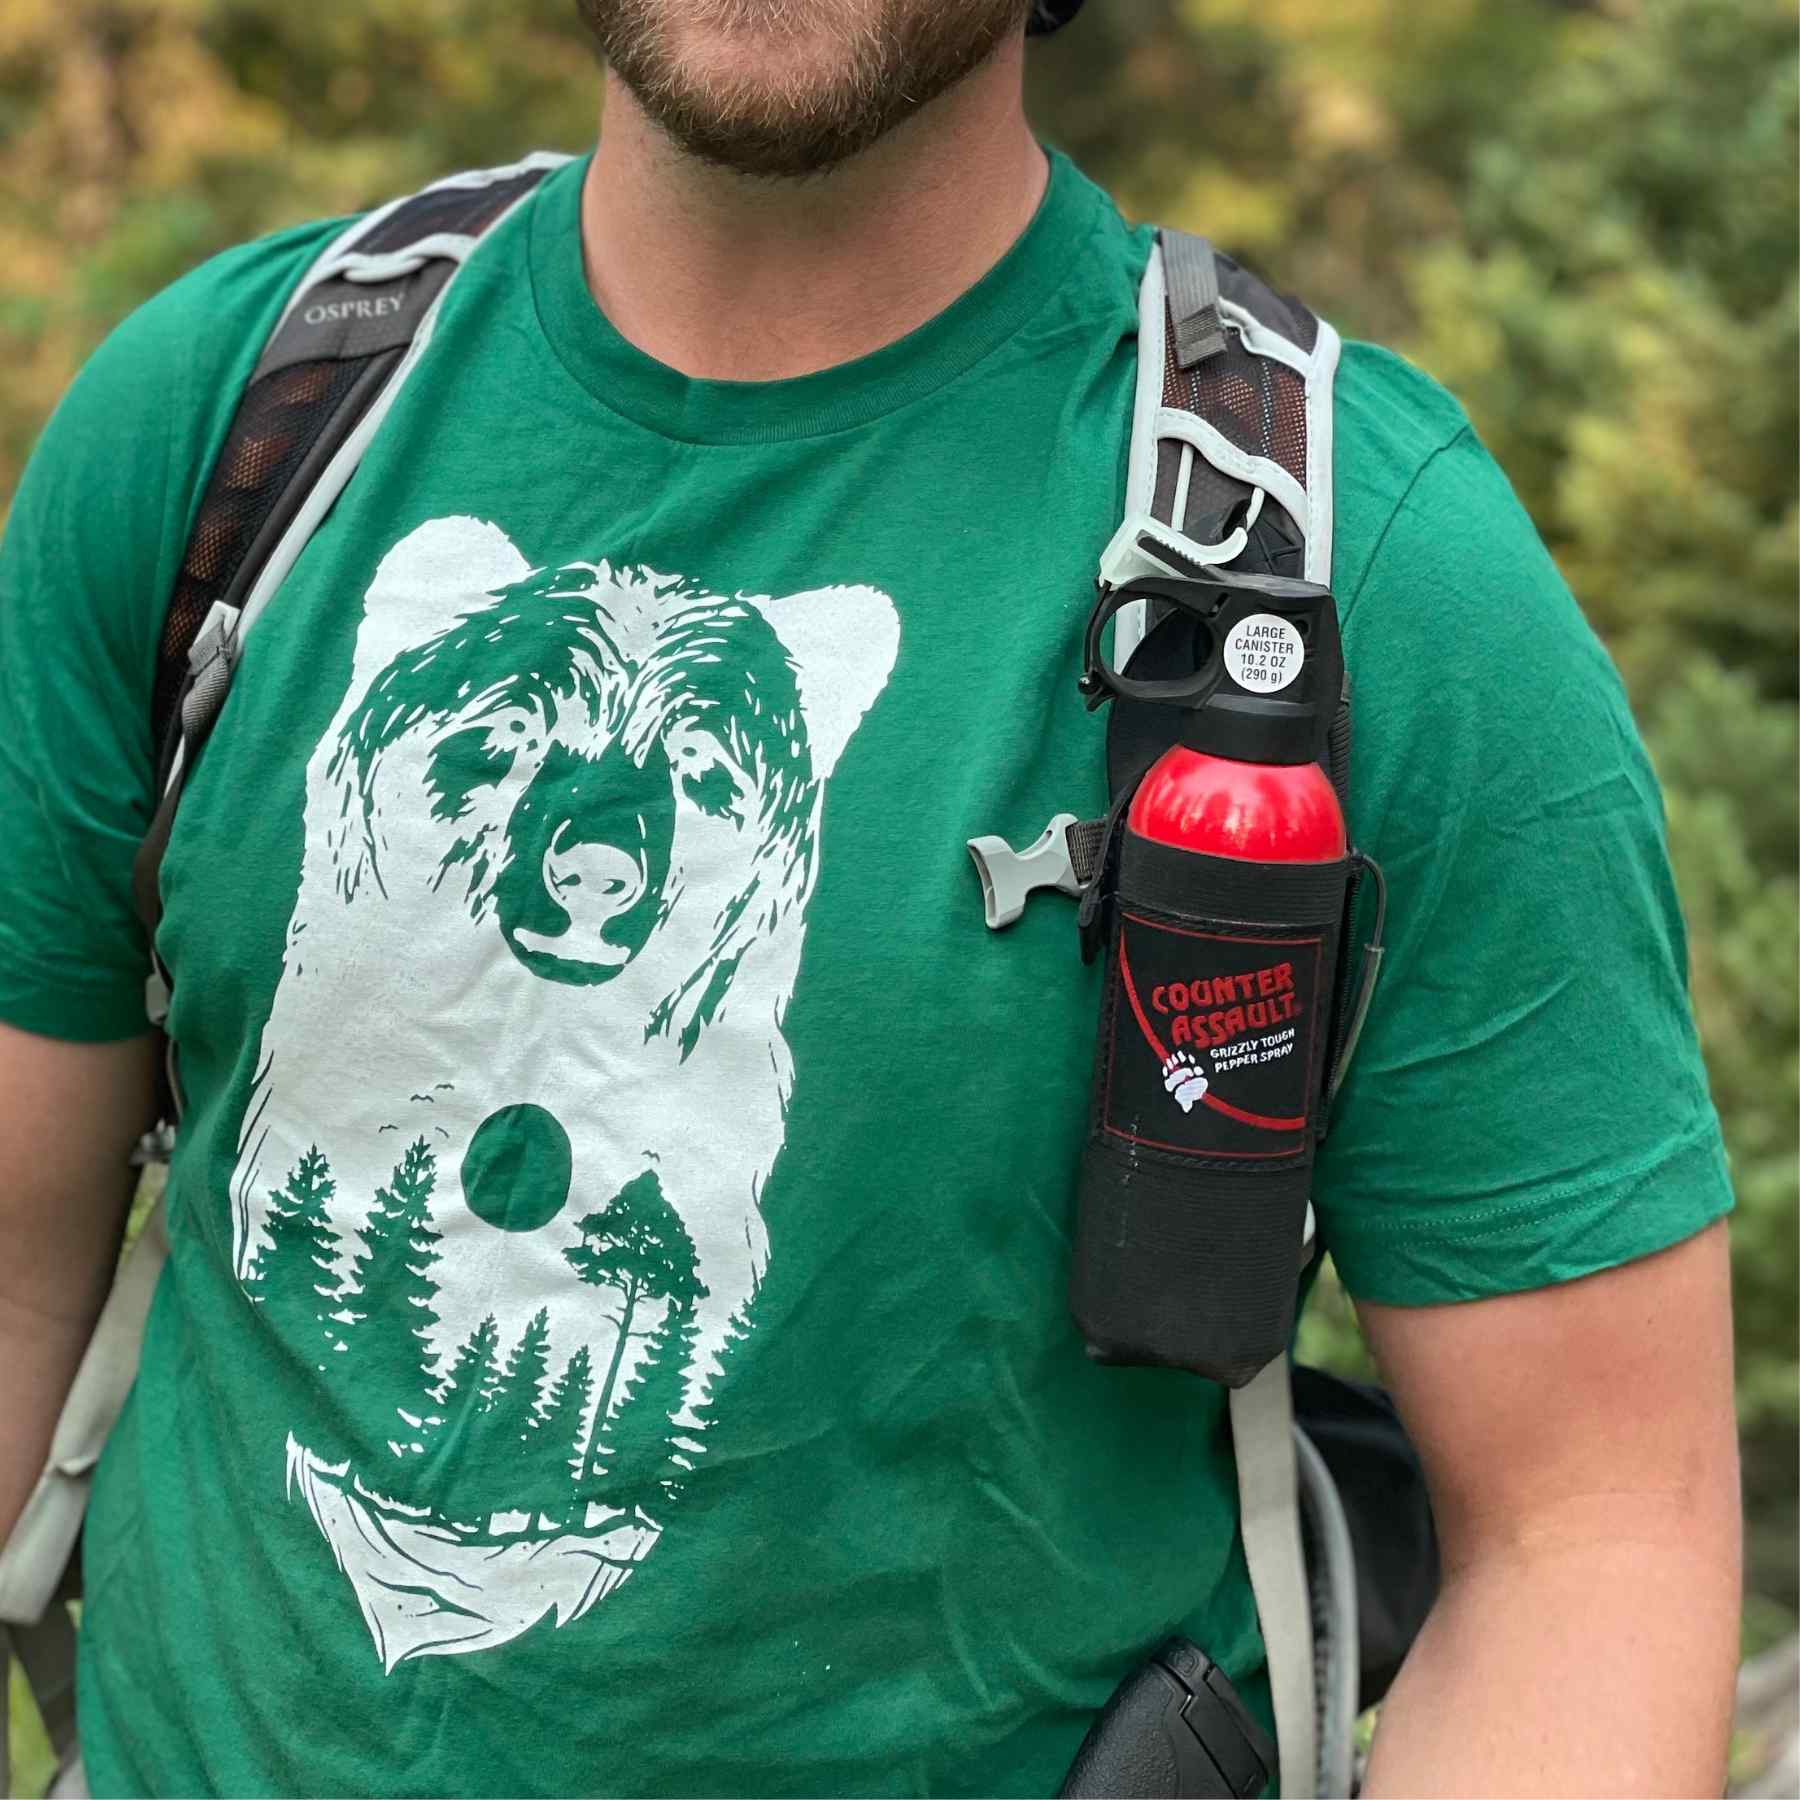 Man with a bear spray universal belt holster attached